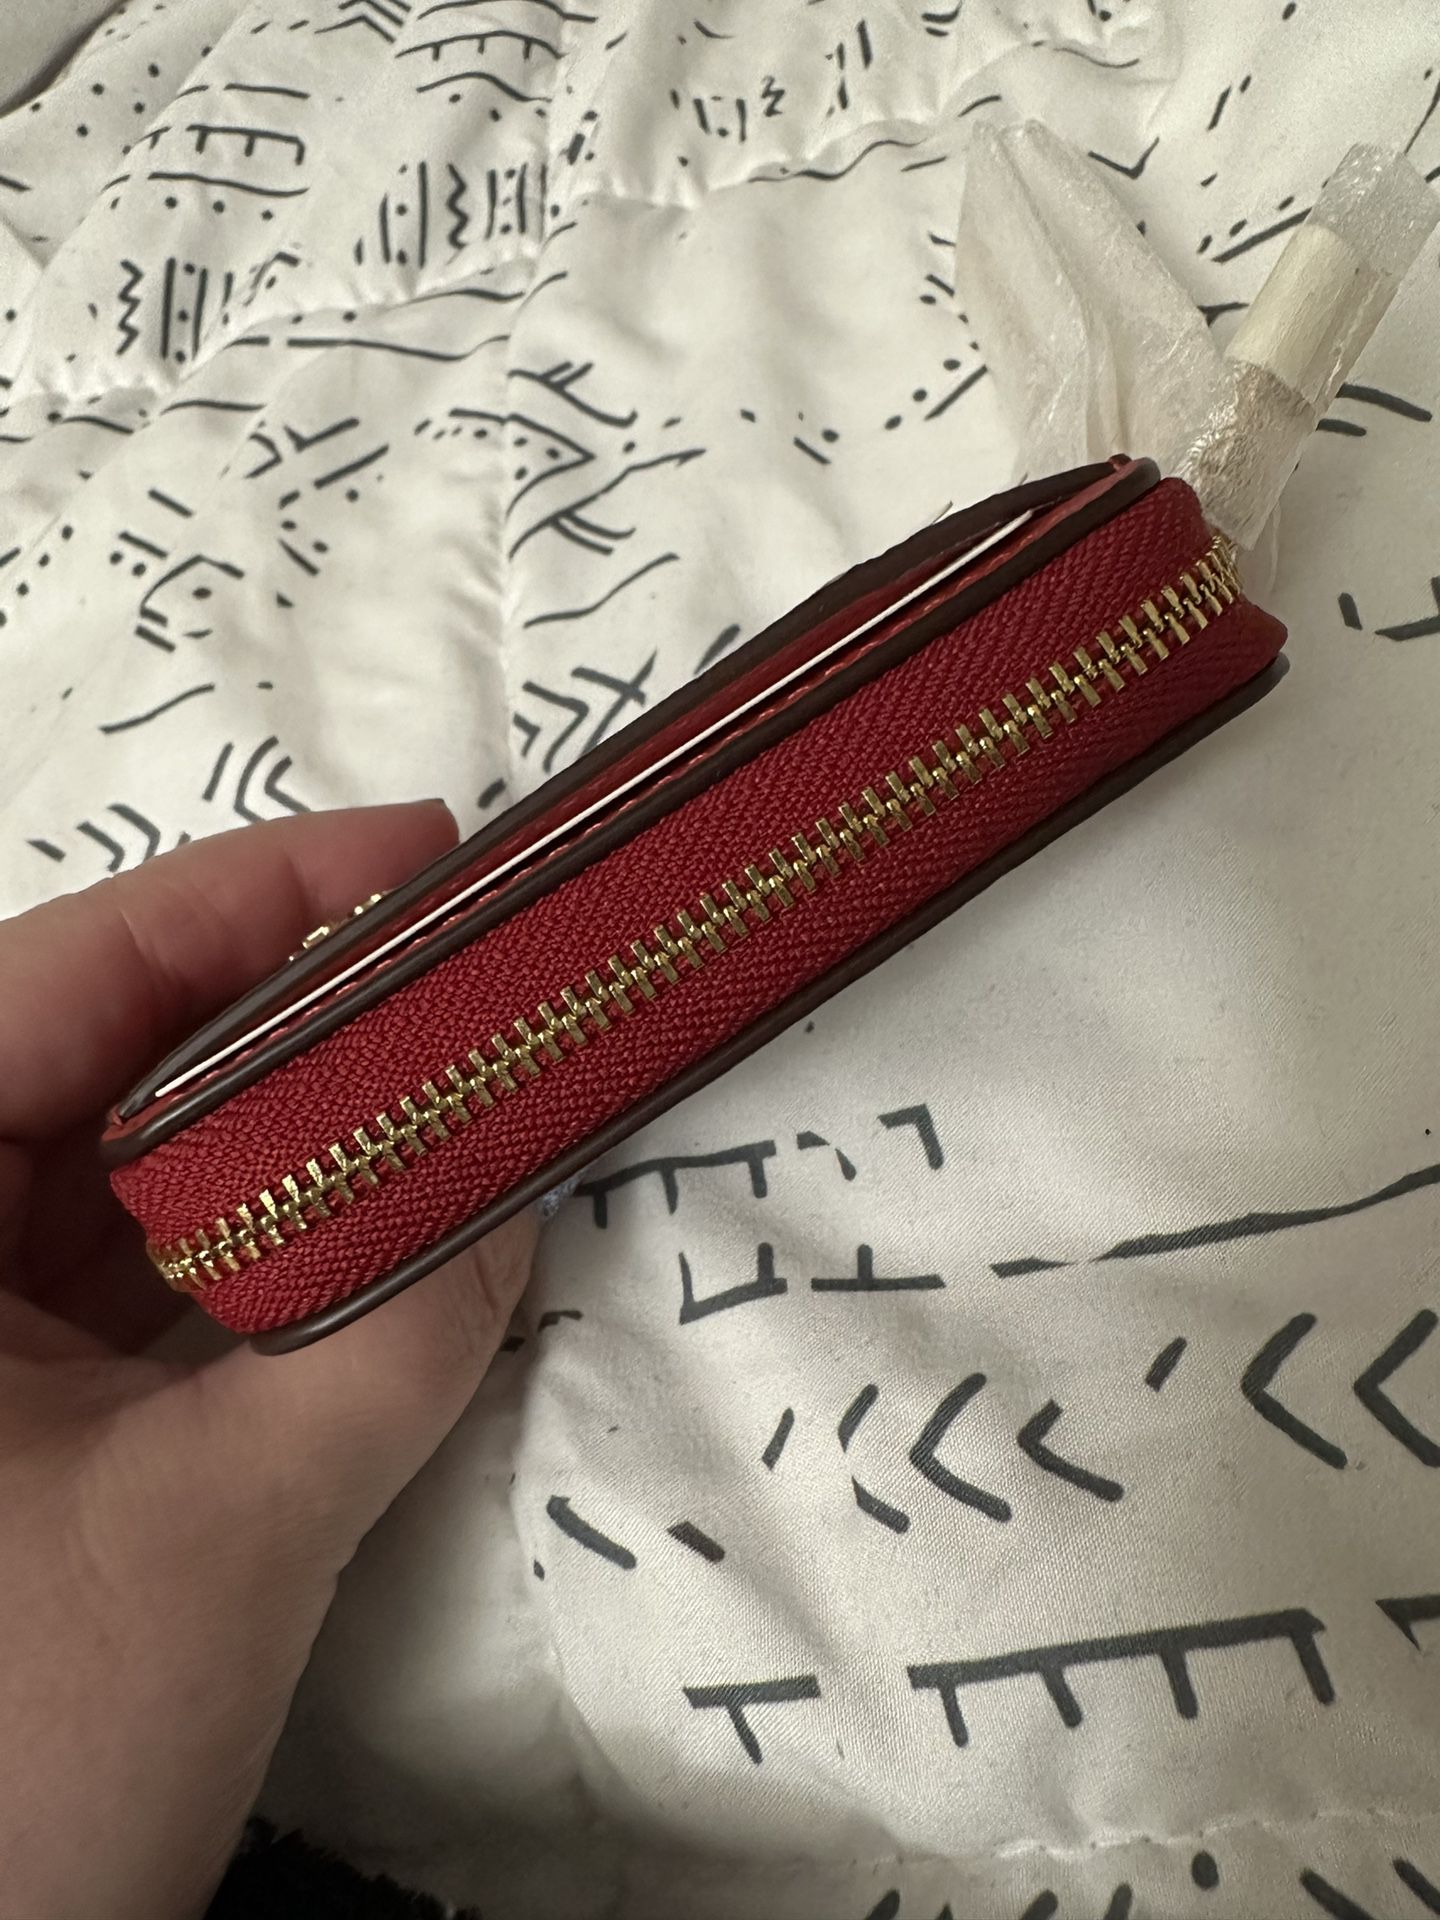 MCM Trifold Wallet for Sale in Vacaville, CA - OfferUp